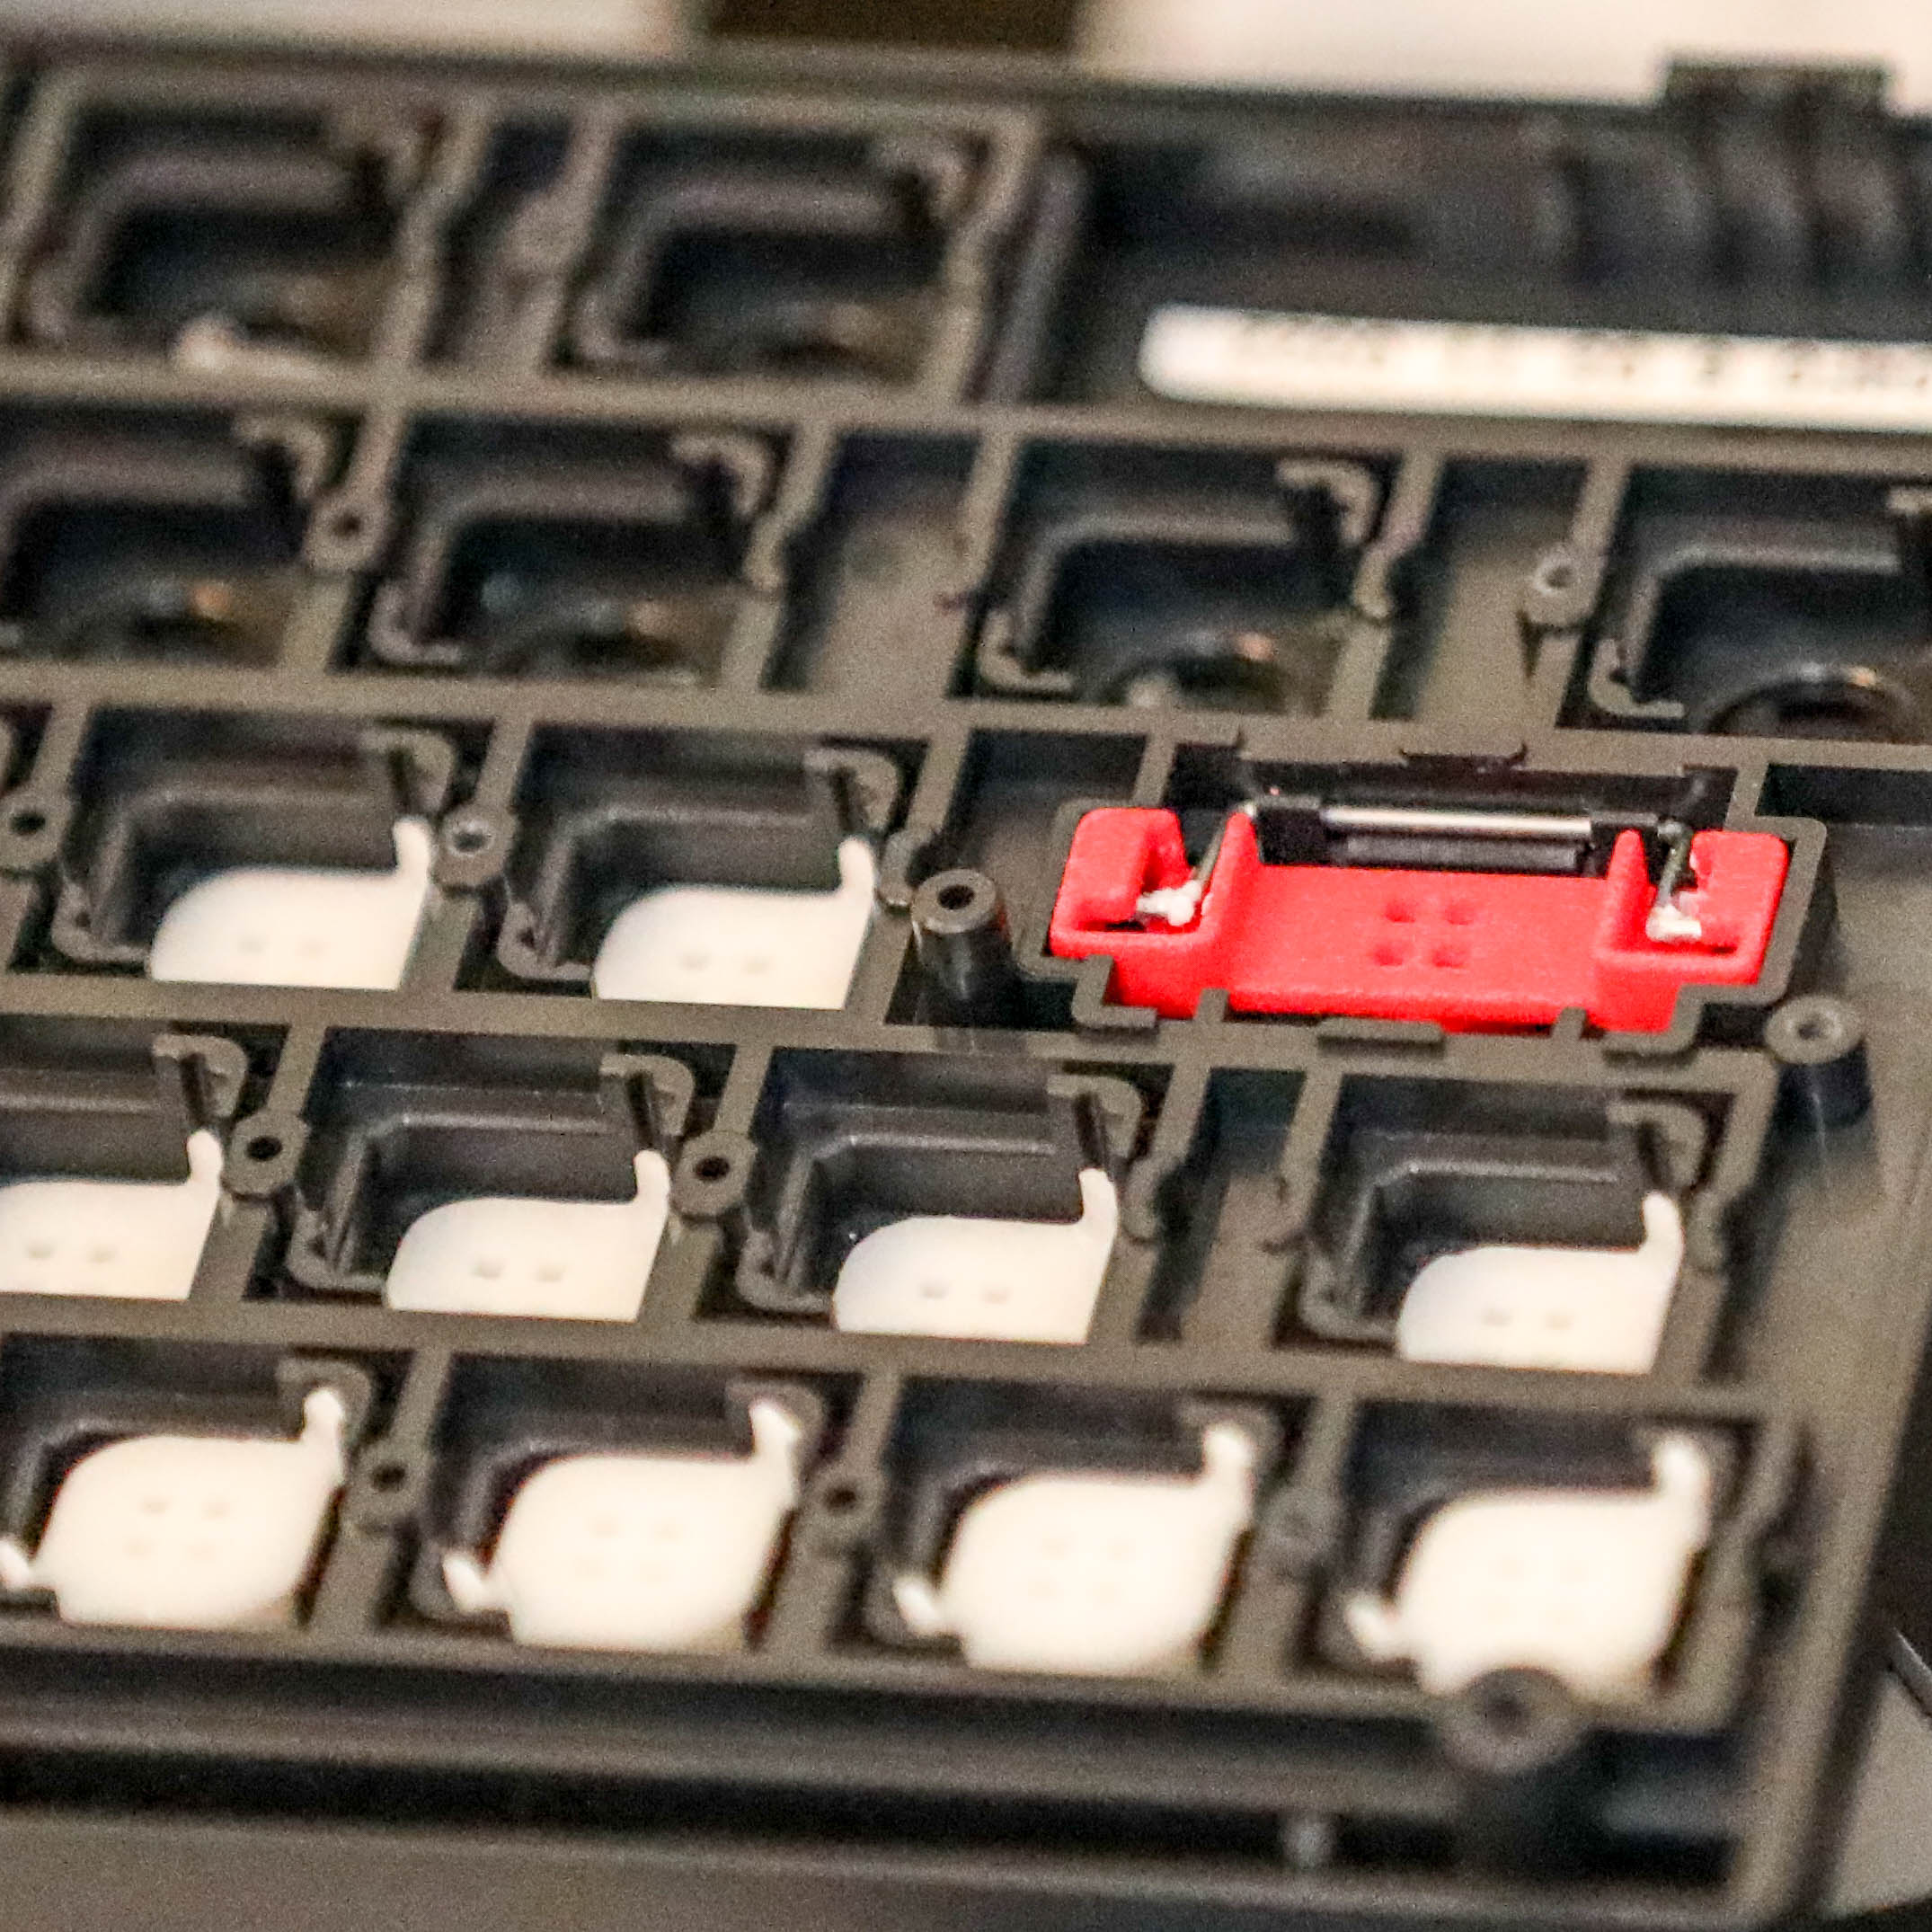 HHKB Topre to Cherry MX Adapter (Open Source!)